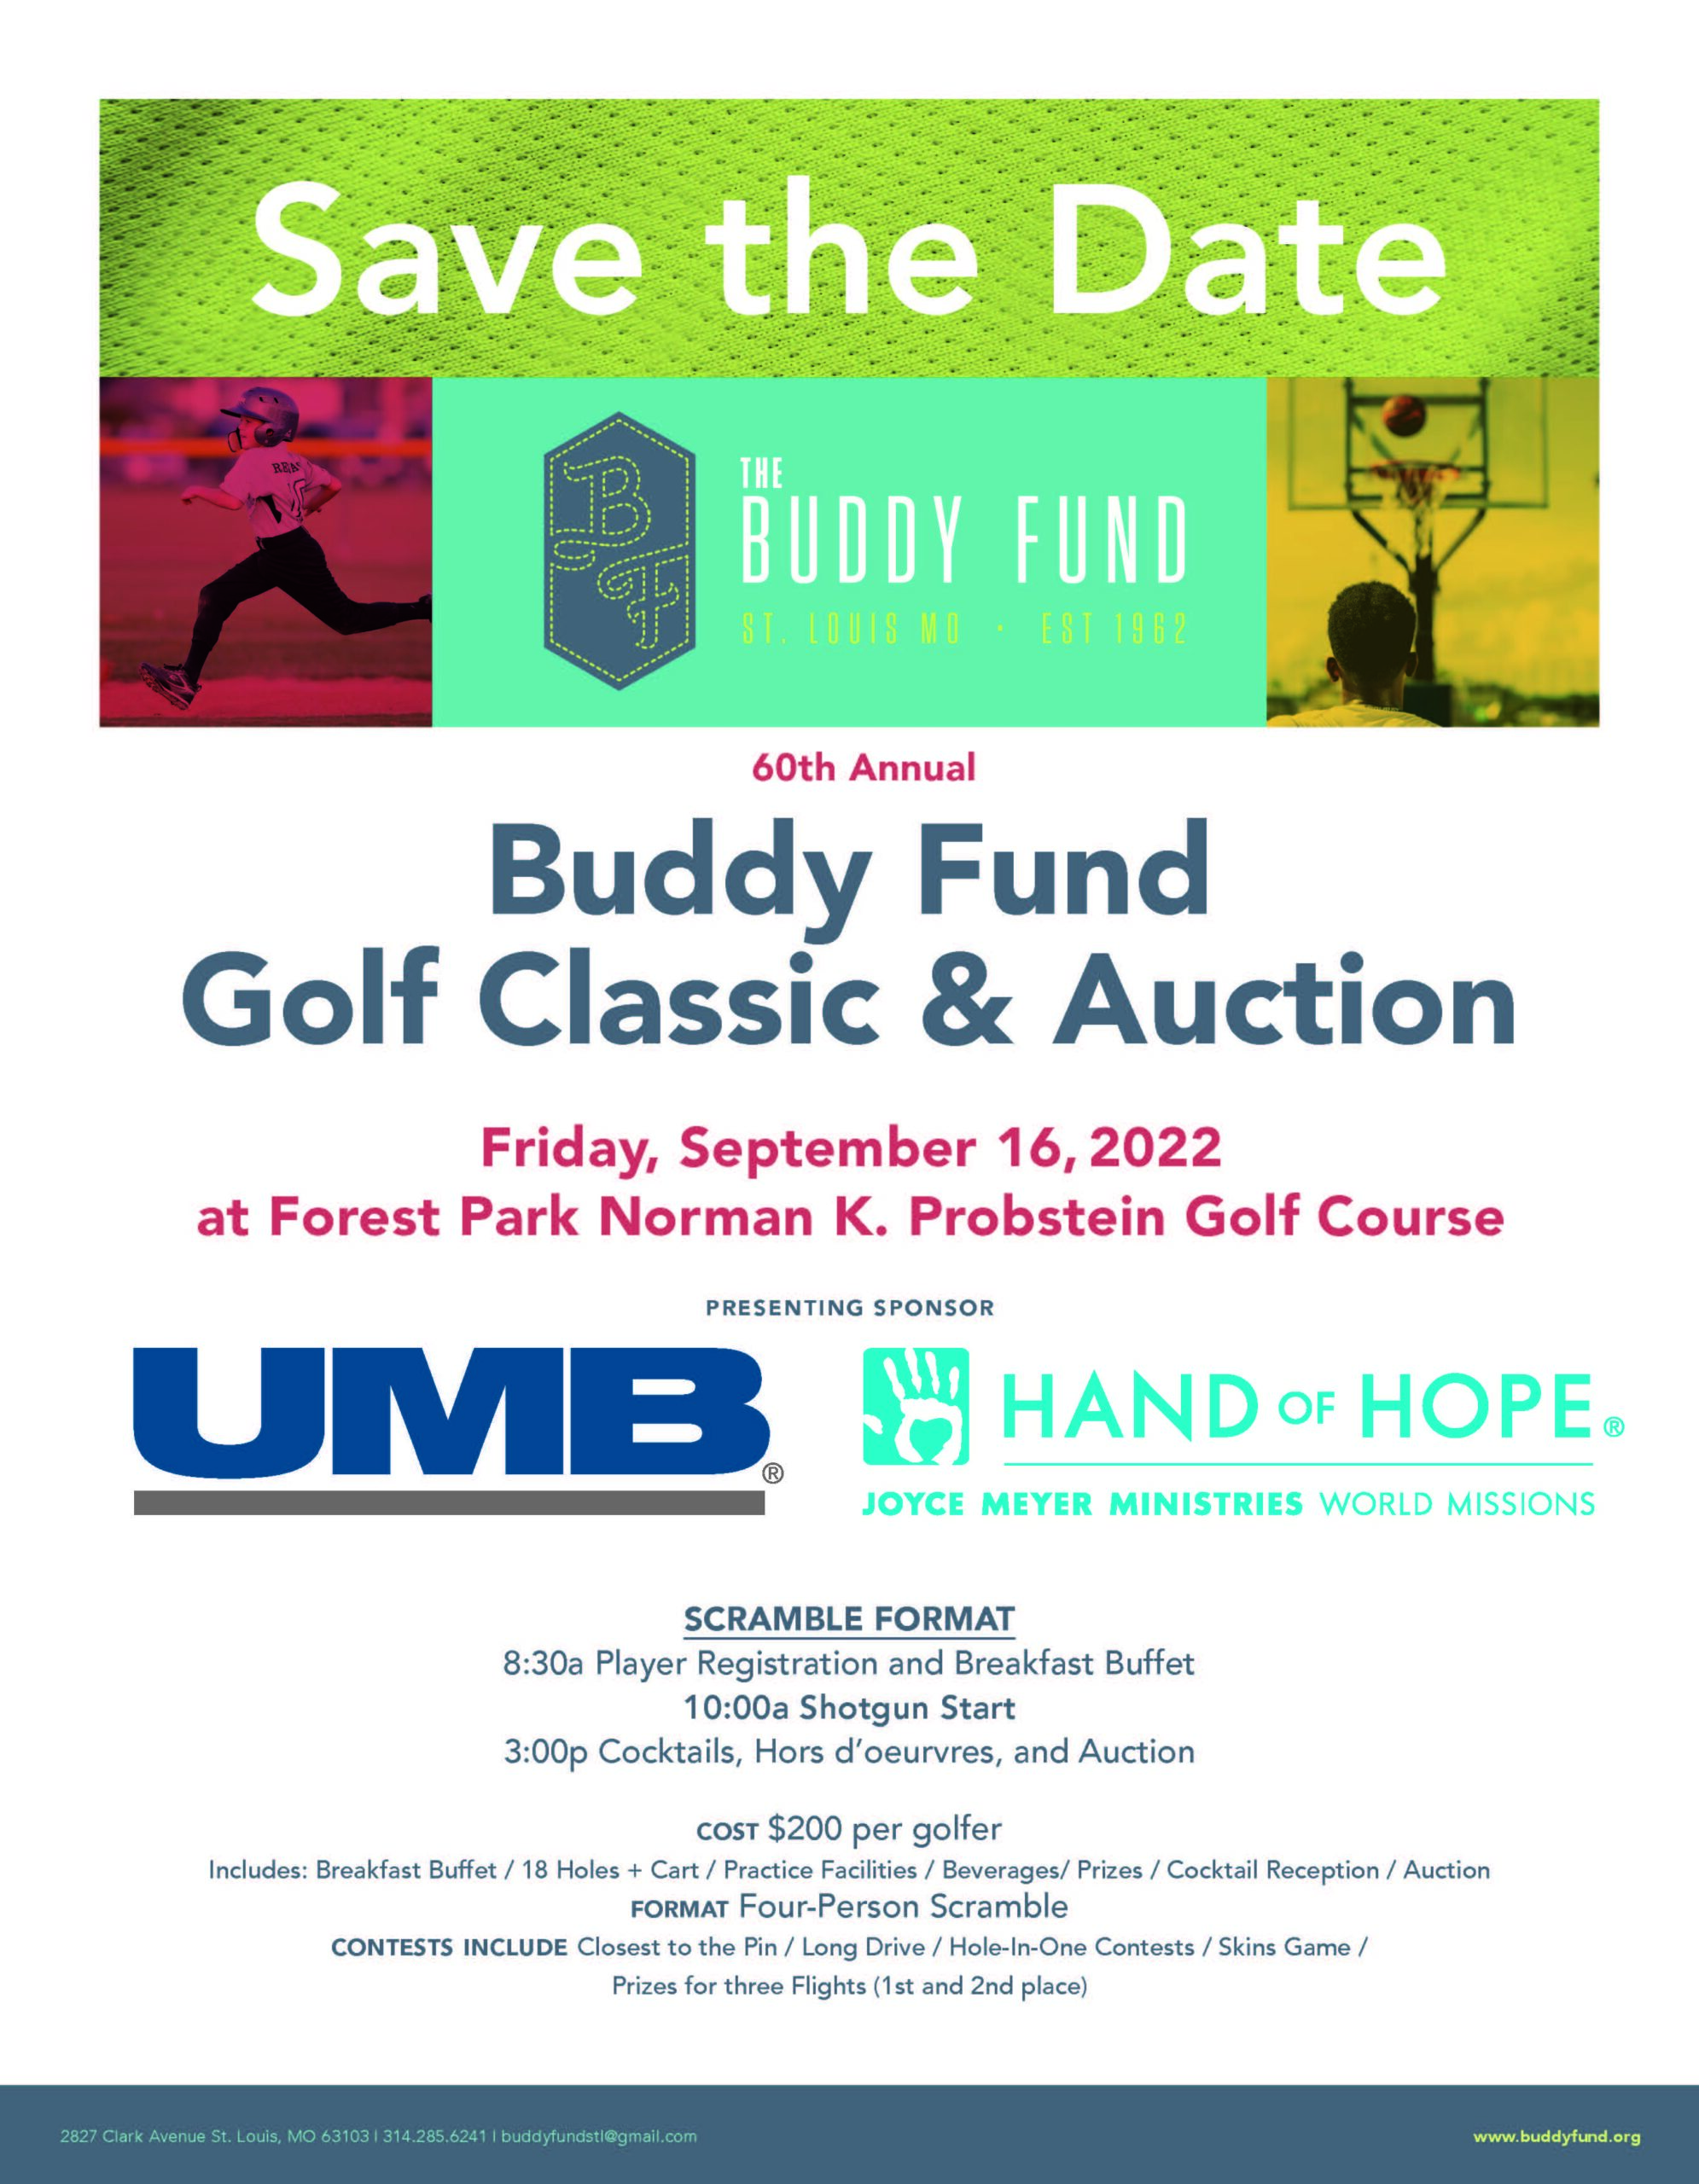 2022 Buddy Fund Golf Classic and Auction